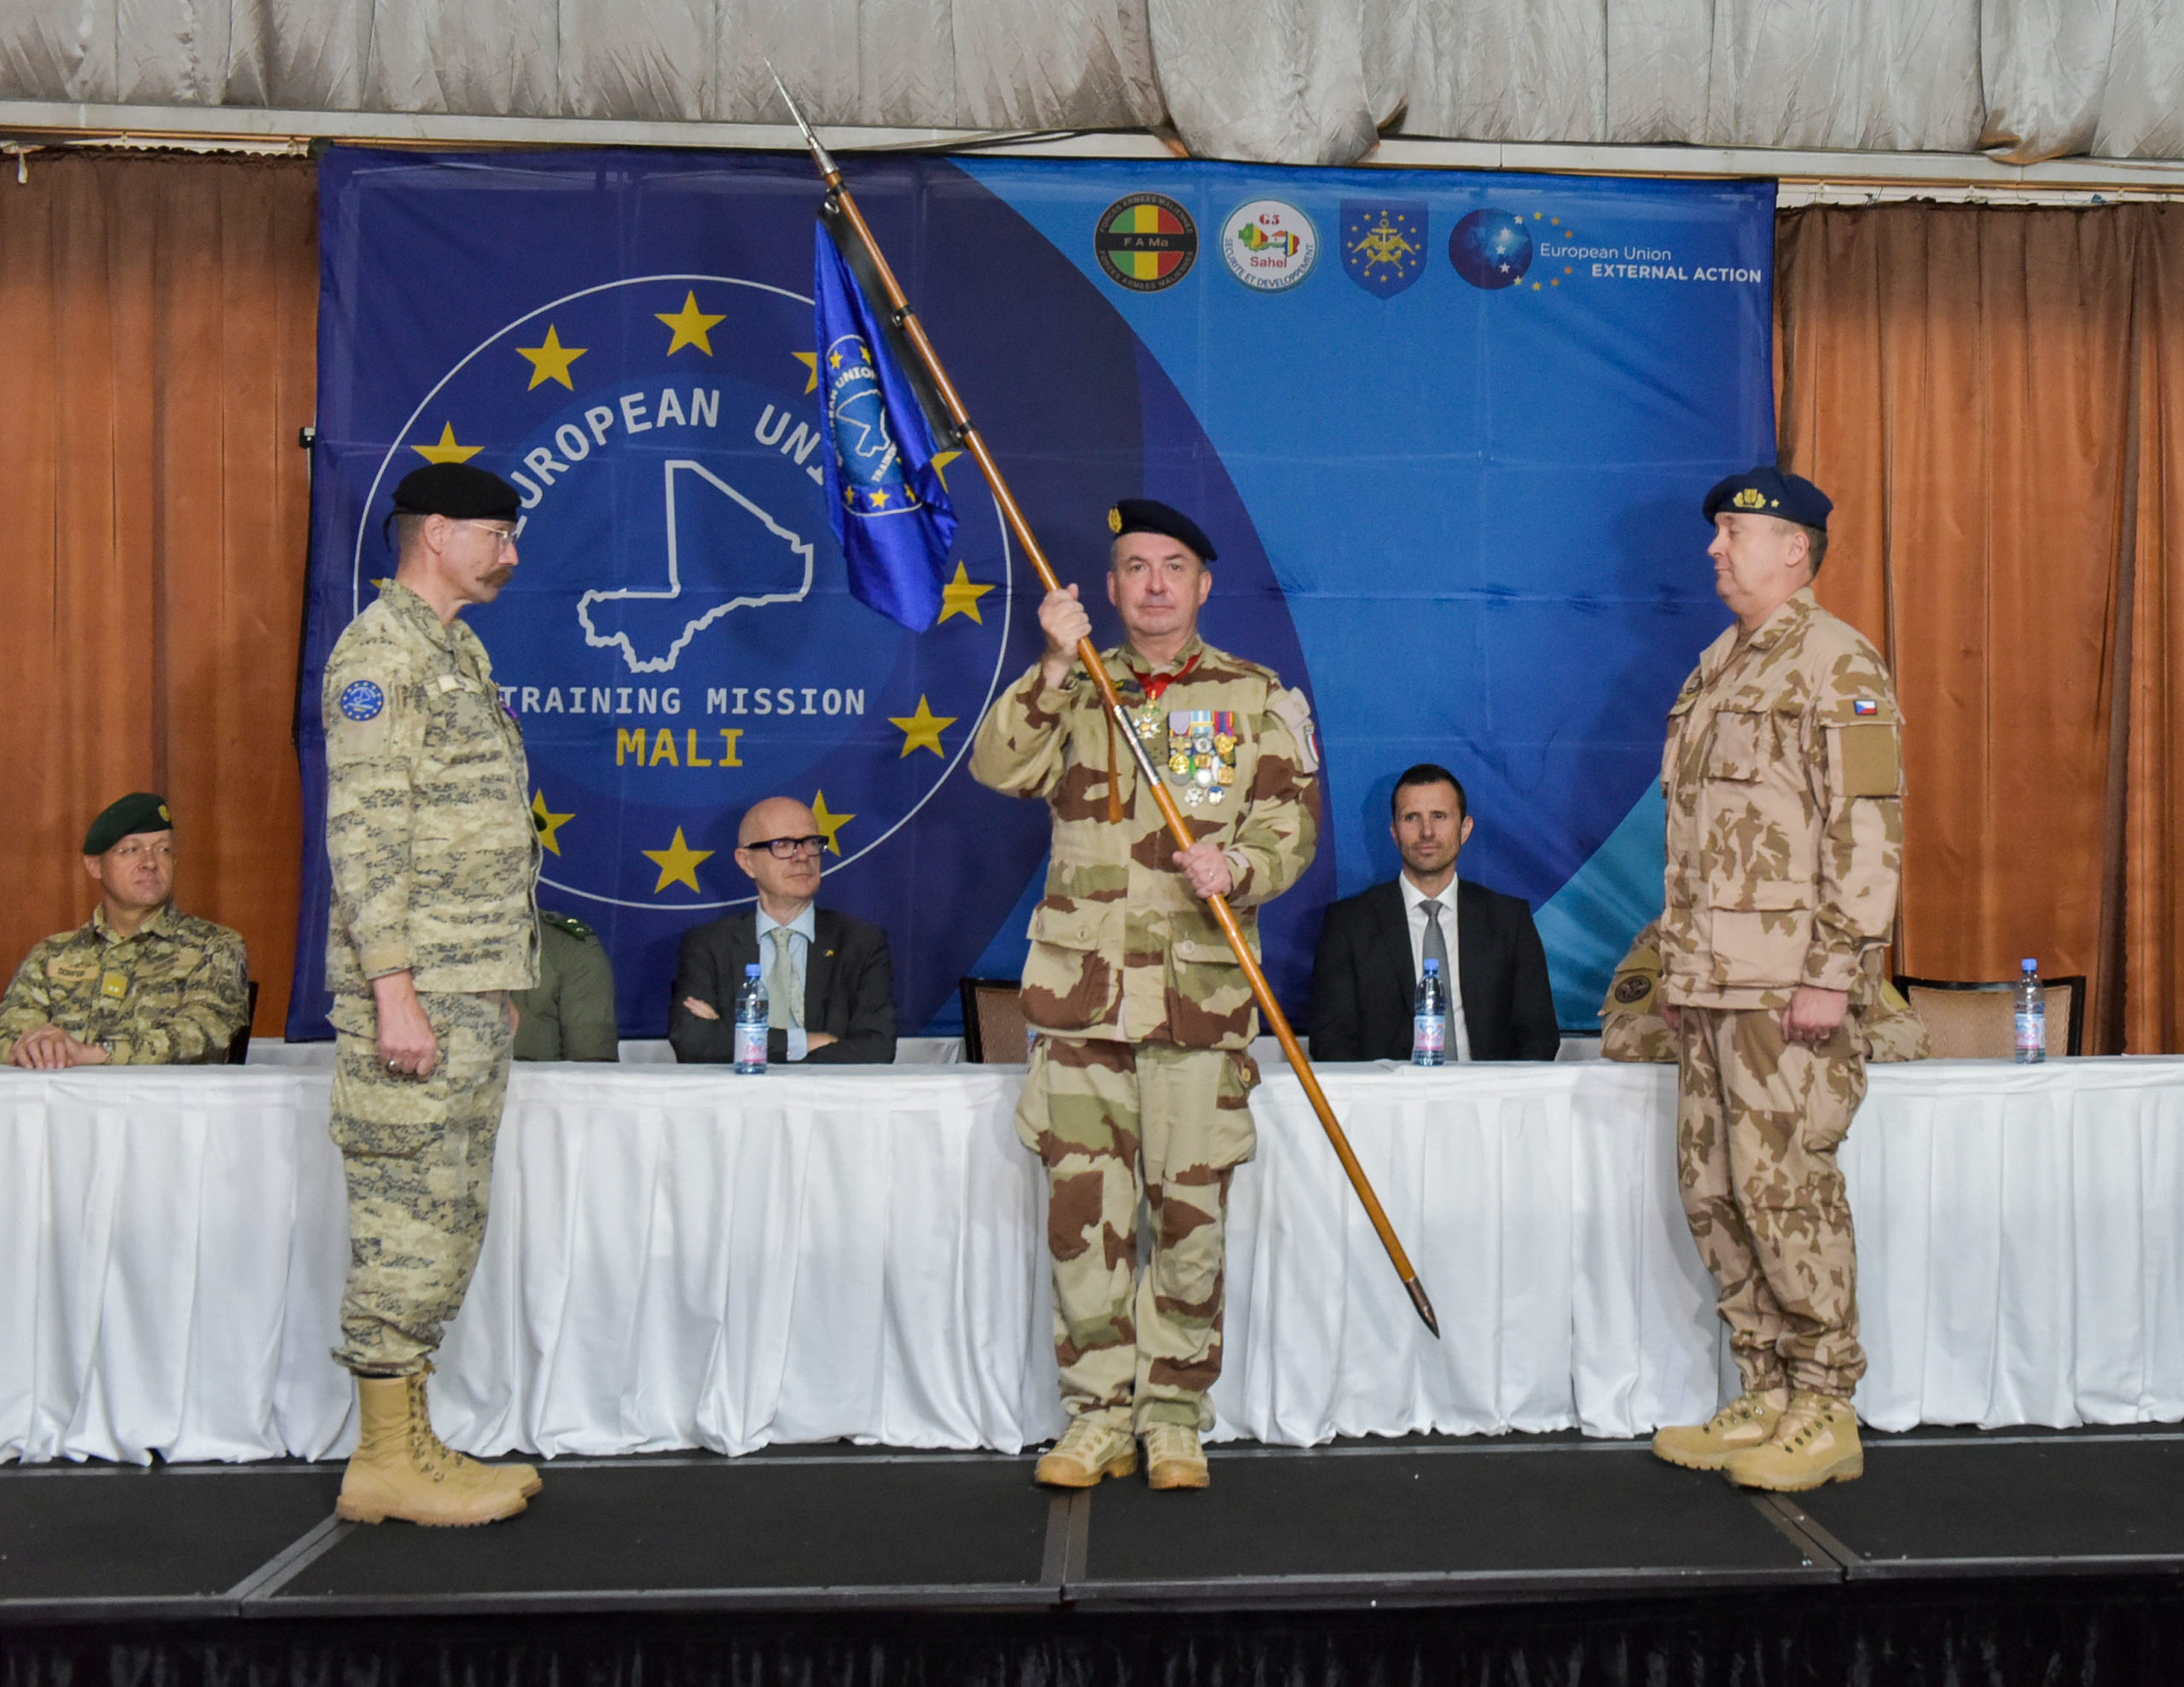 CHANGE OF COMMAND AT THE EUROPEAN TRAINING MISSION IN MALI